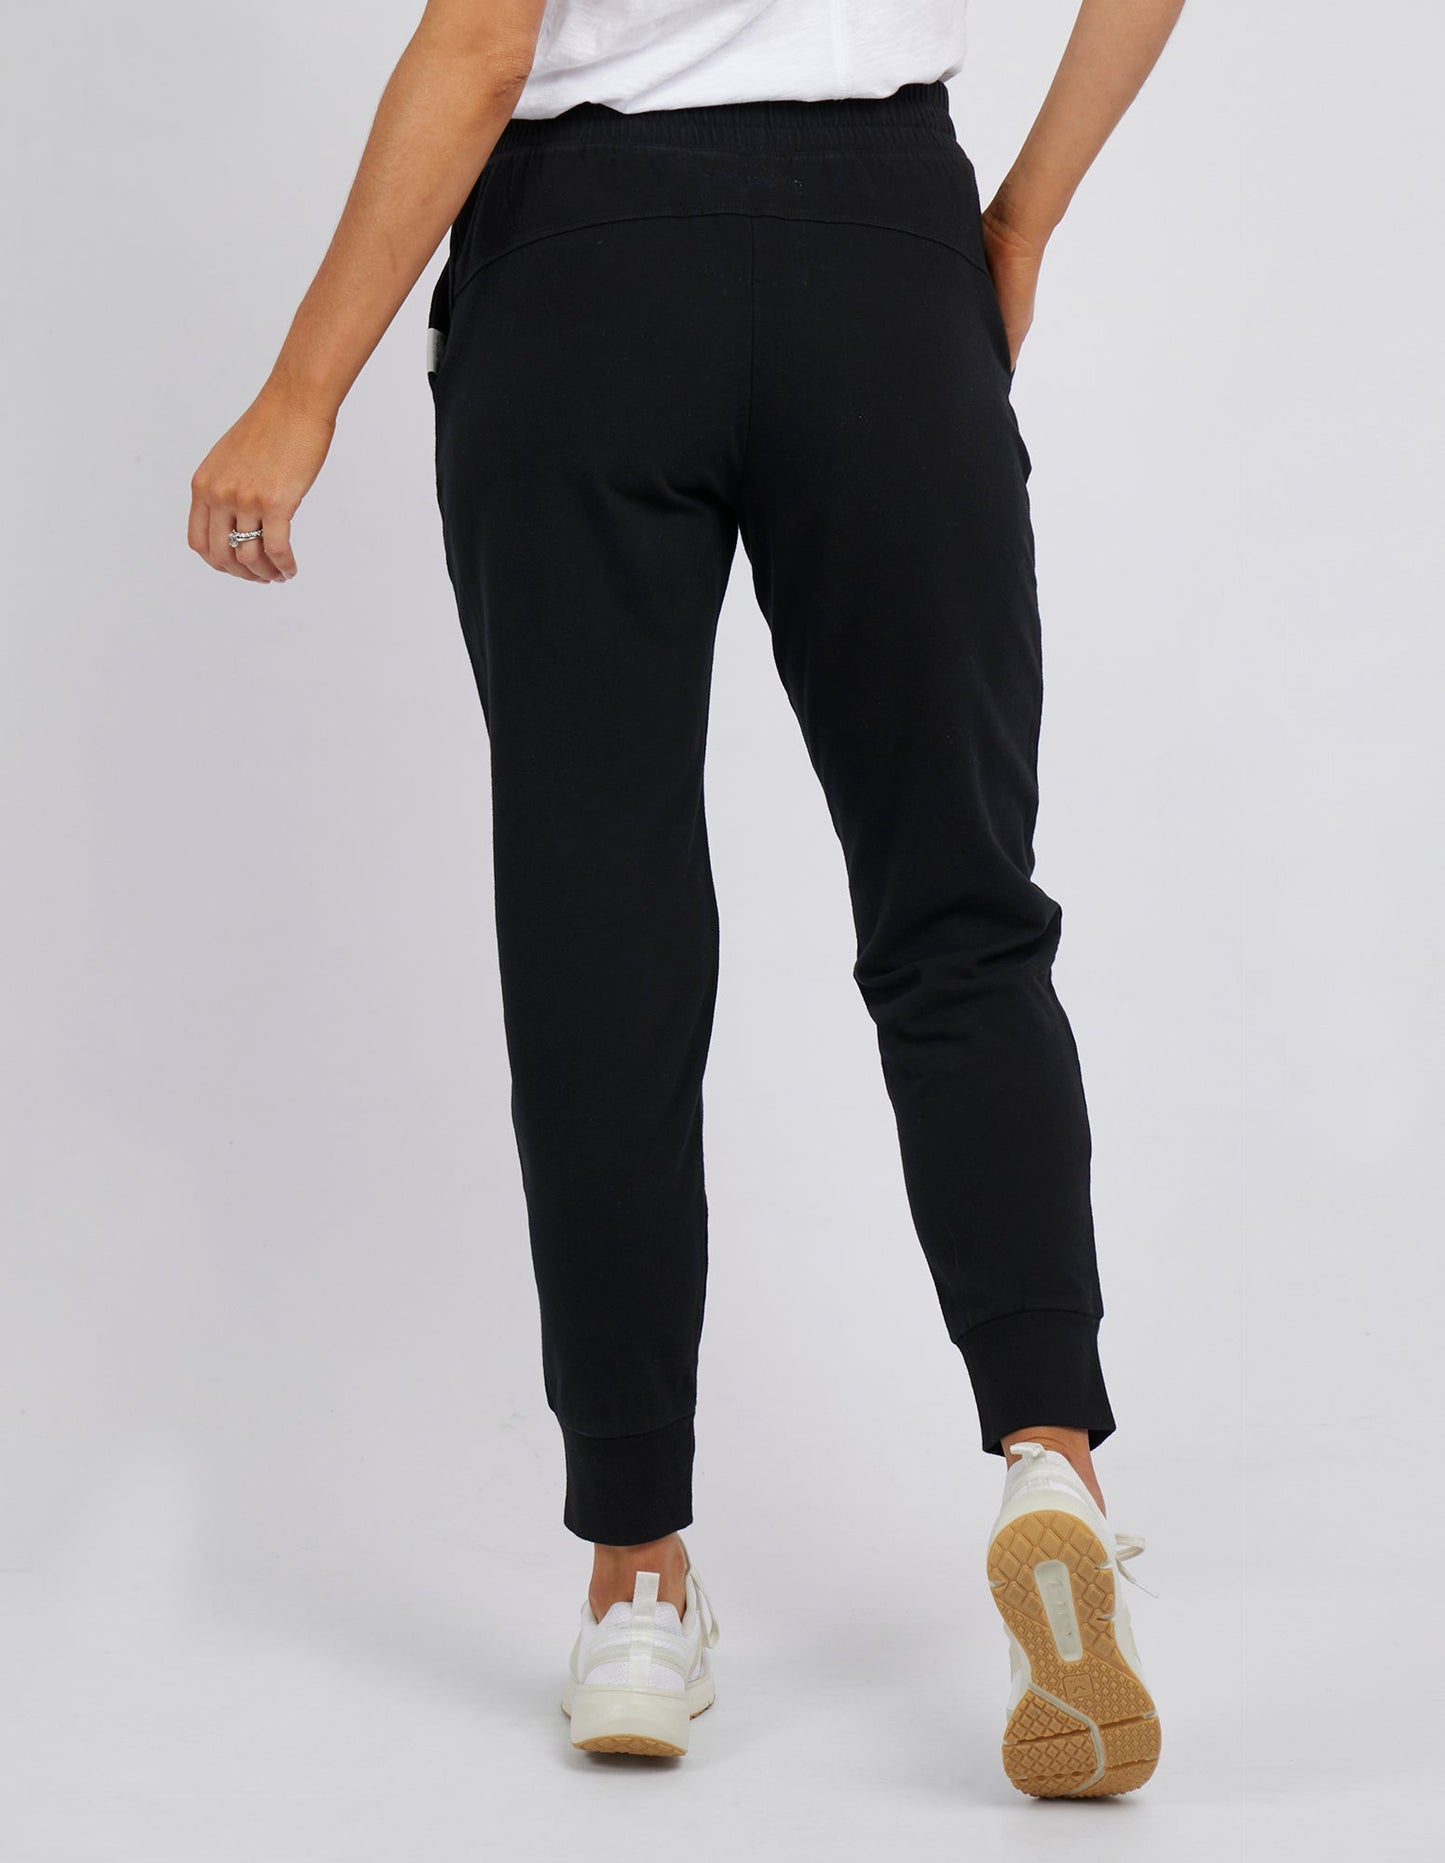 FOXWOOD LAZY DAYS PANT - BLACK - THE VOGUE STORE